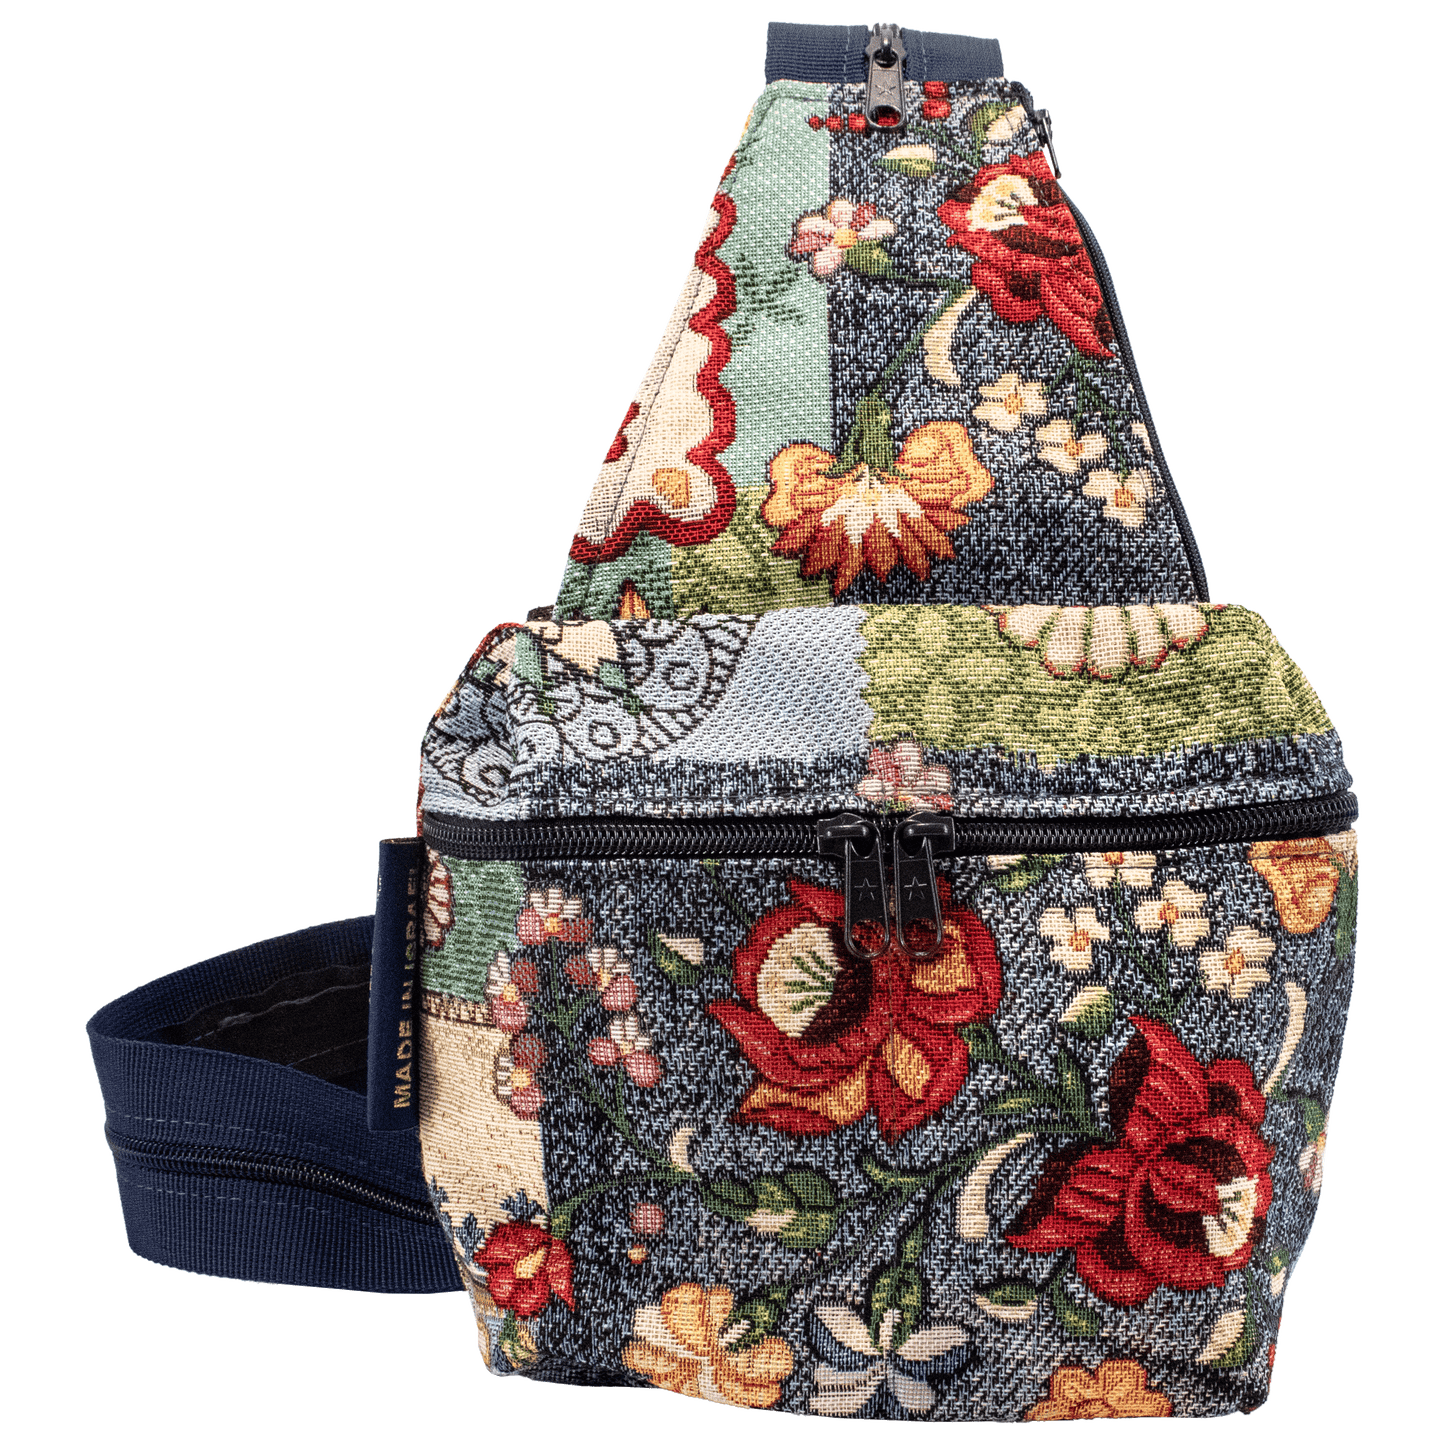 Small convertible backpack shoulder bag Navy and multi-color floral patchwork pattern